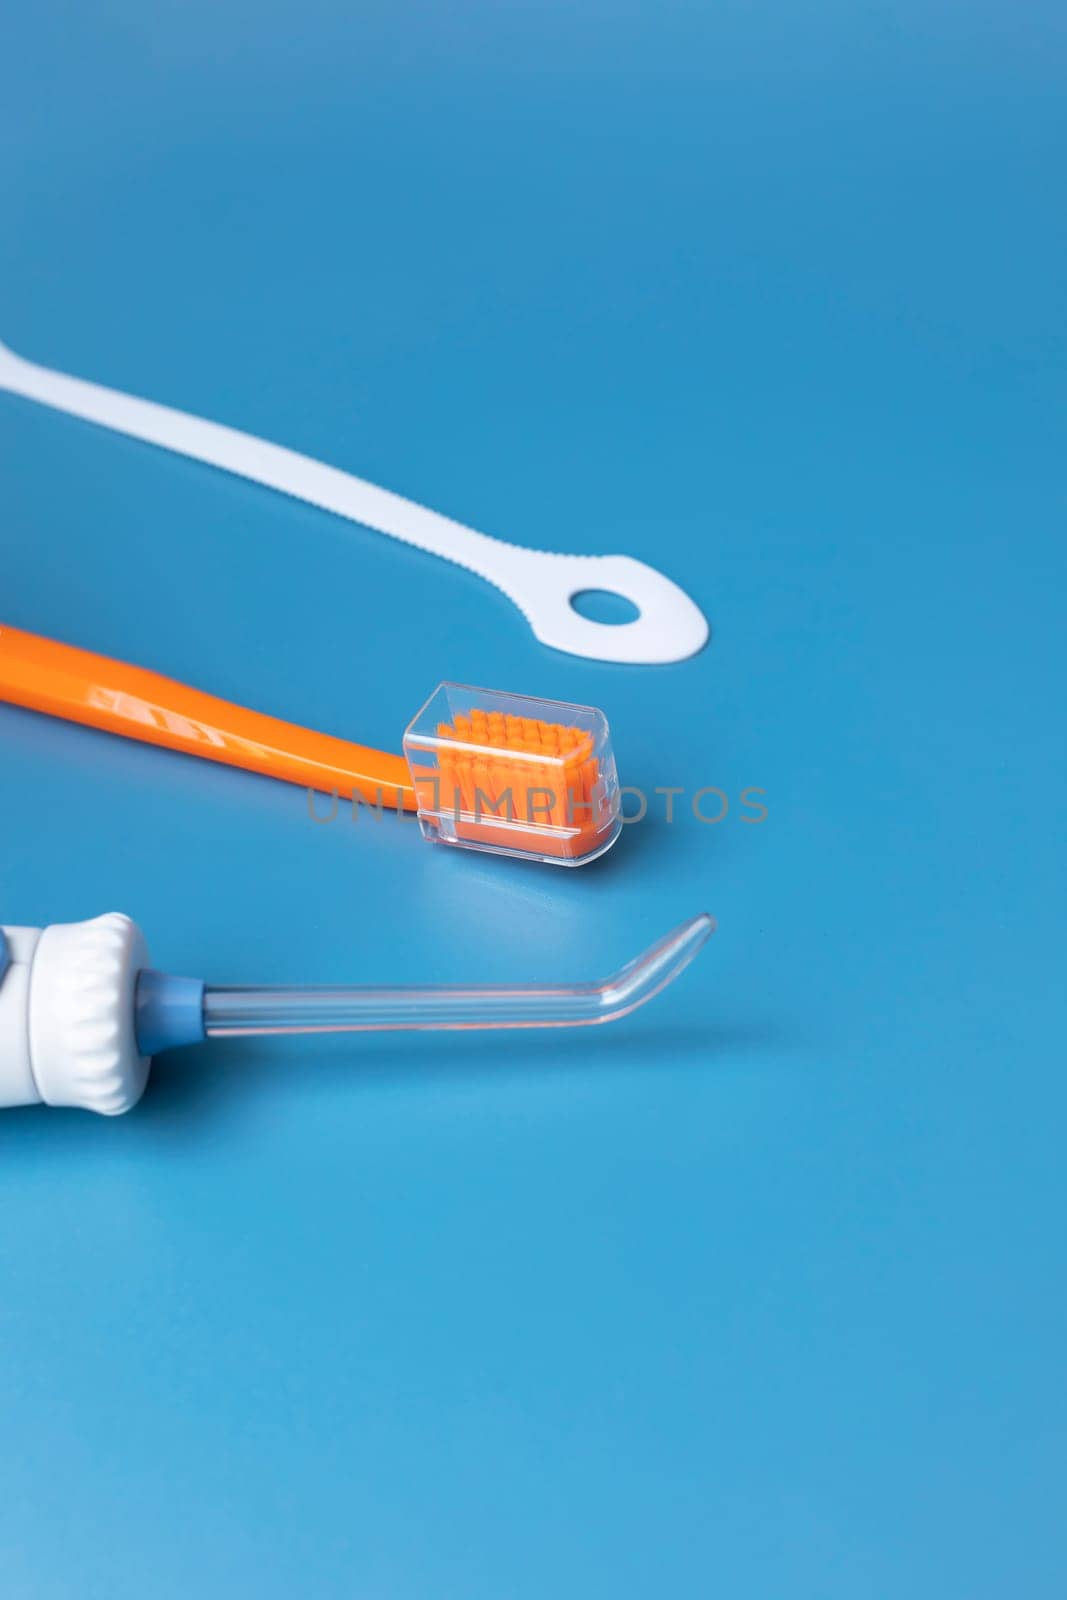 Dental Cleaning Set, Oral Hygiene. Toothbrush, Oral Irrigator, Floss, Tongue Scraper On Blue Background. Flat Lay Of Dental Care Tools, Tooth Hygienic Equipment. Vertical Plane. Copy Space For Text. by netatsi